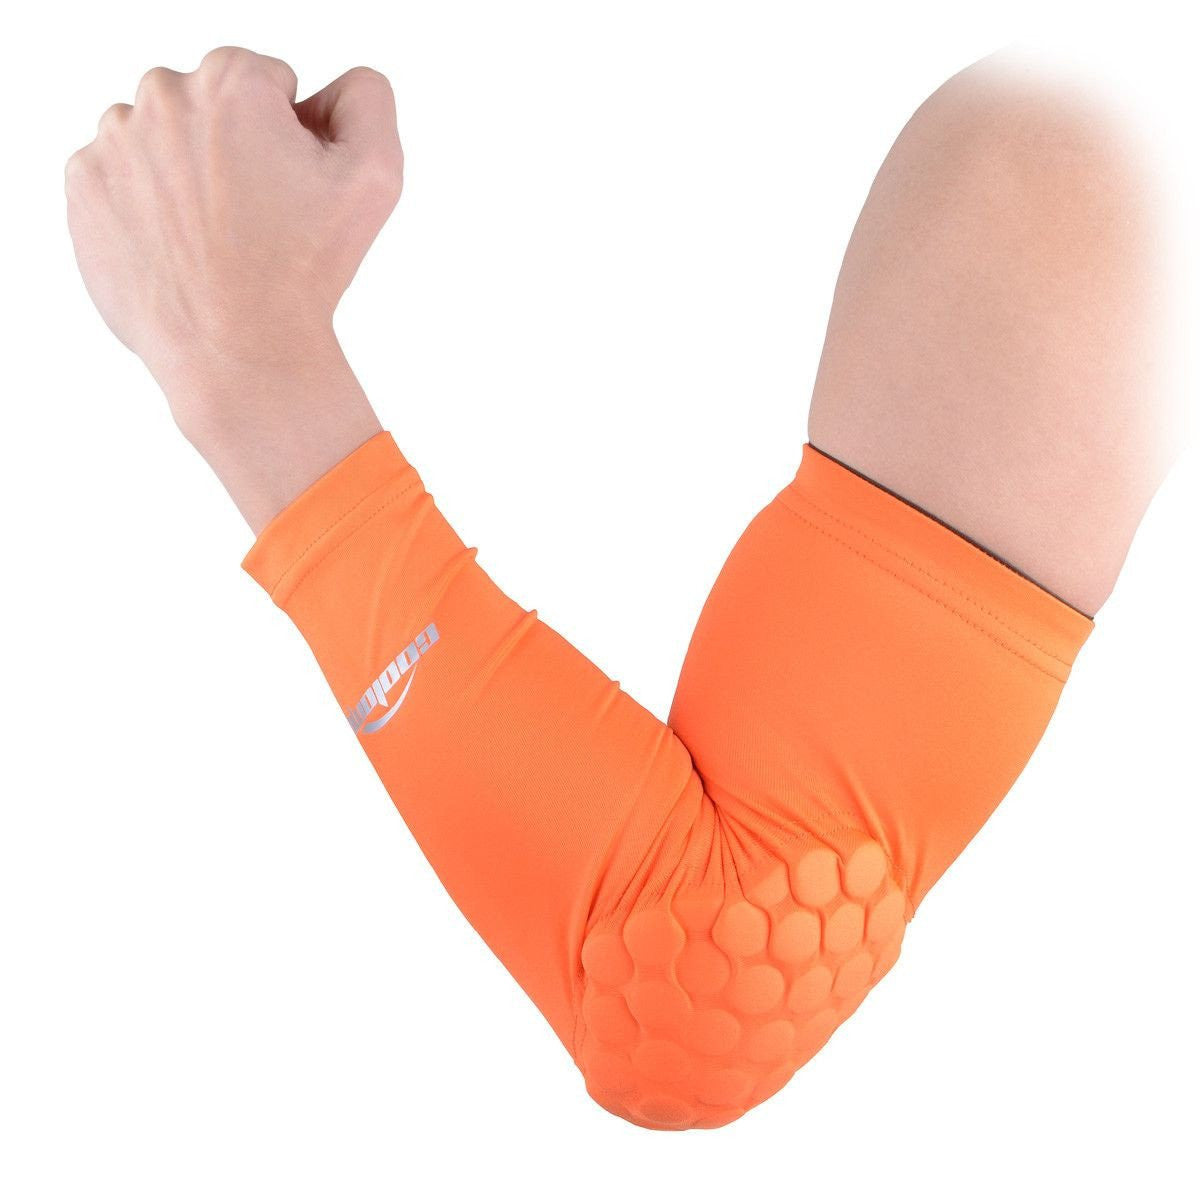  Orange Camo Arm Sleeve For Youth Sports Men Women  Compression - Bicep Elbow Forearm Sleeves For Football Basketball Baseball  Athletics - UV Spf Cooling Sun Protection For Arms - Tattoo Cover - Sleaves